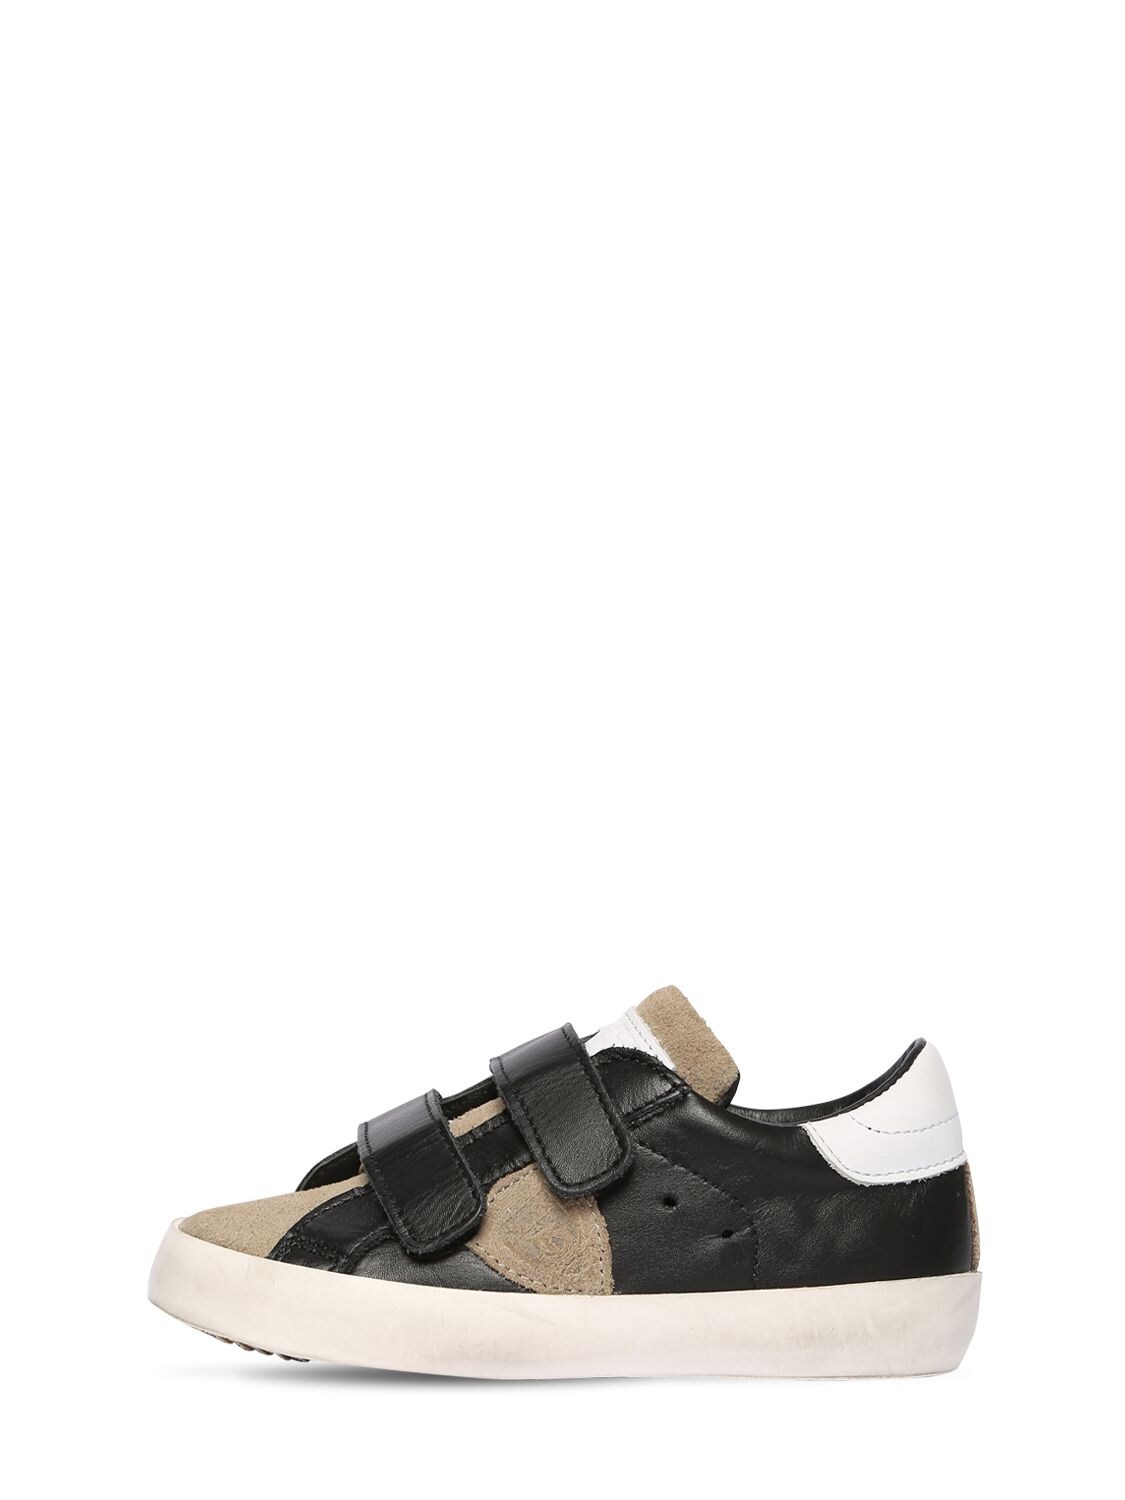 Philippe Model Kids' Leather & Suede Strap Trainers In Black,beige